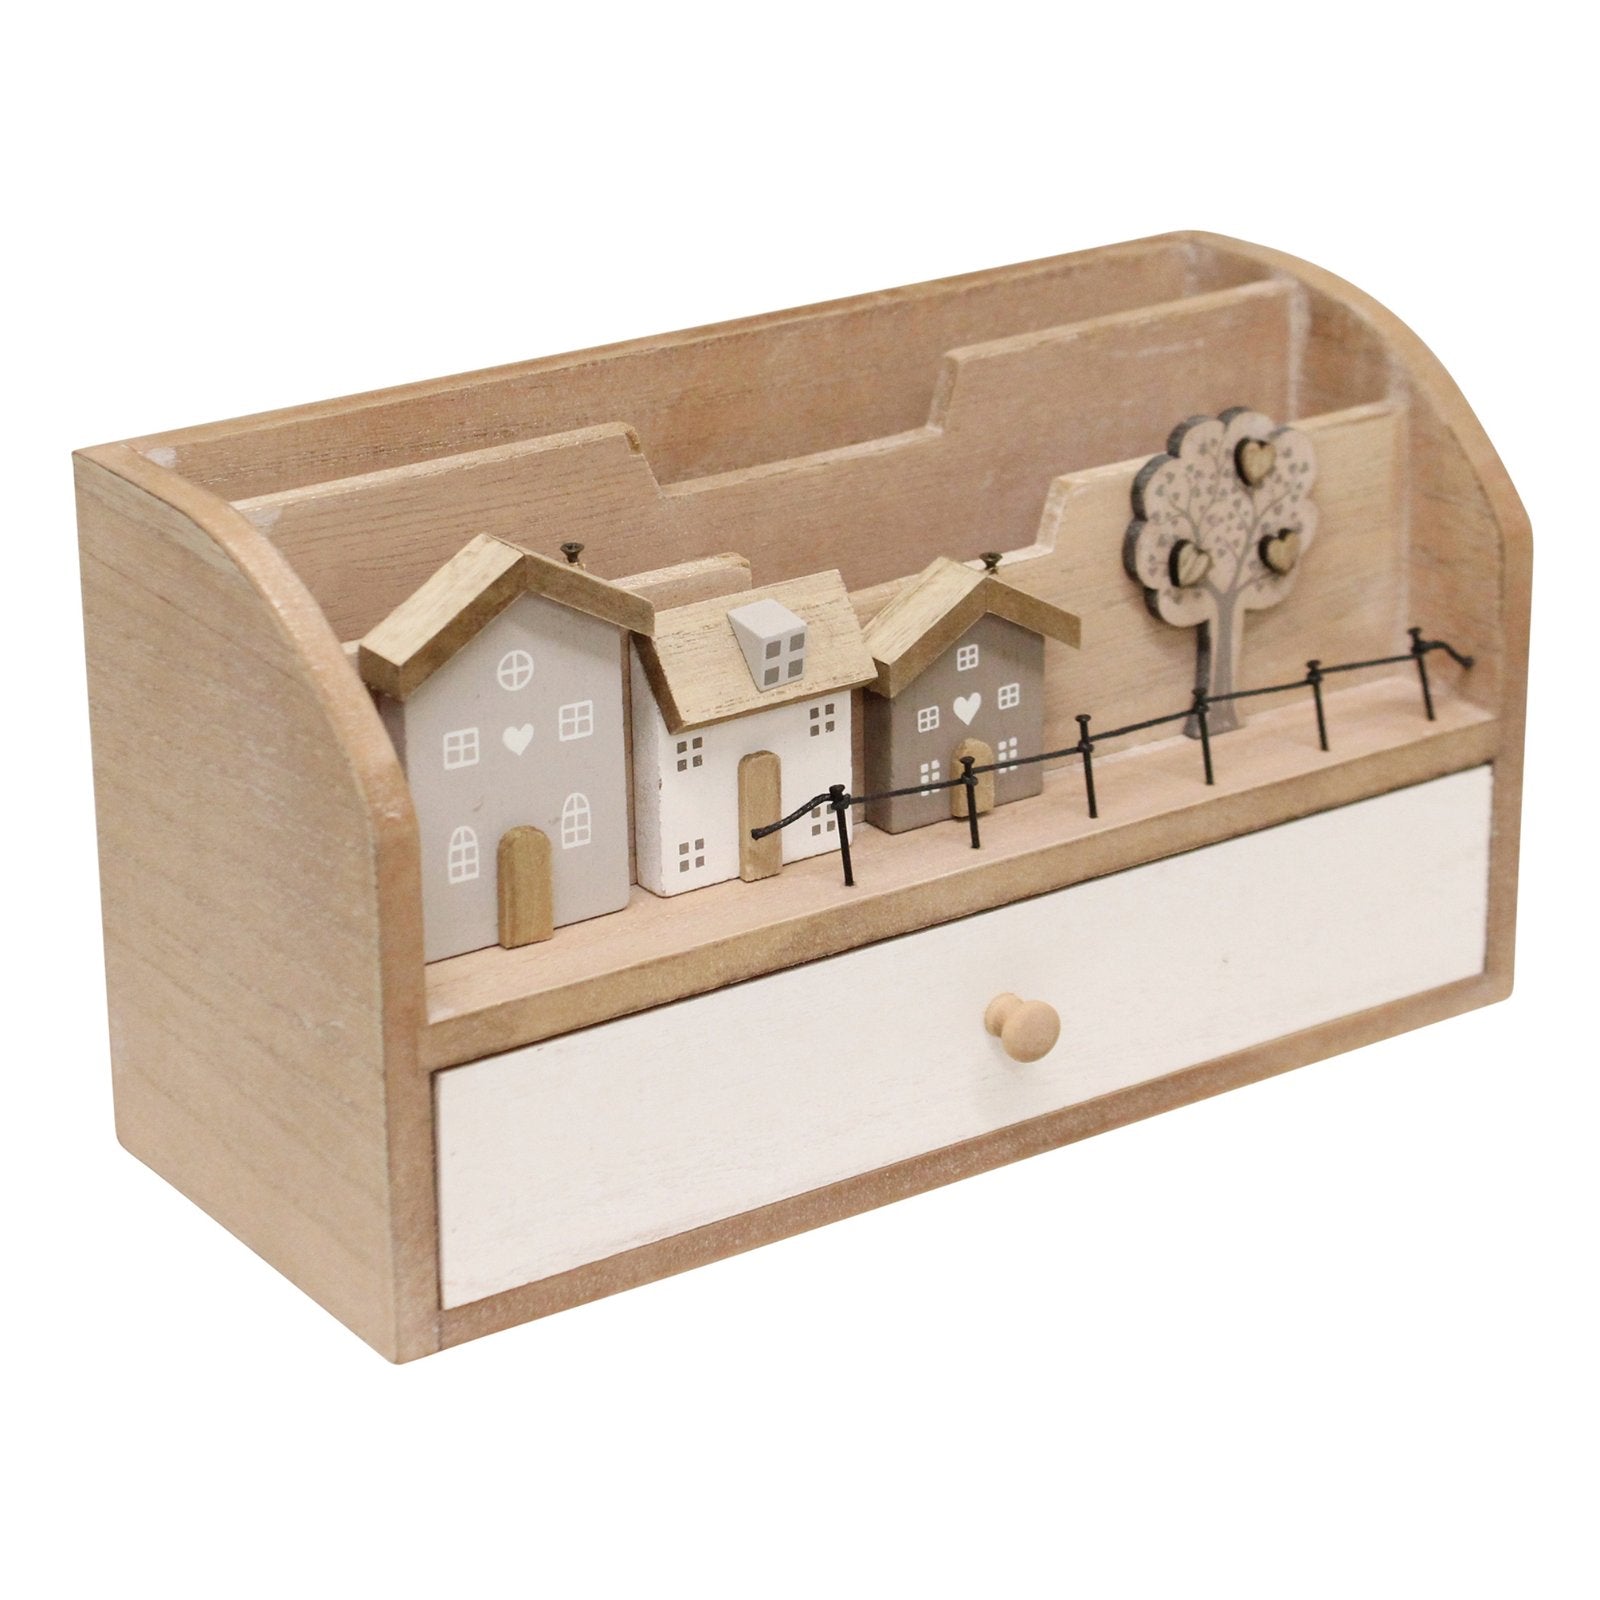 View Letter Rack With Drawers Wooden Houses Design information